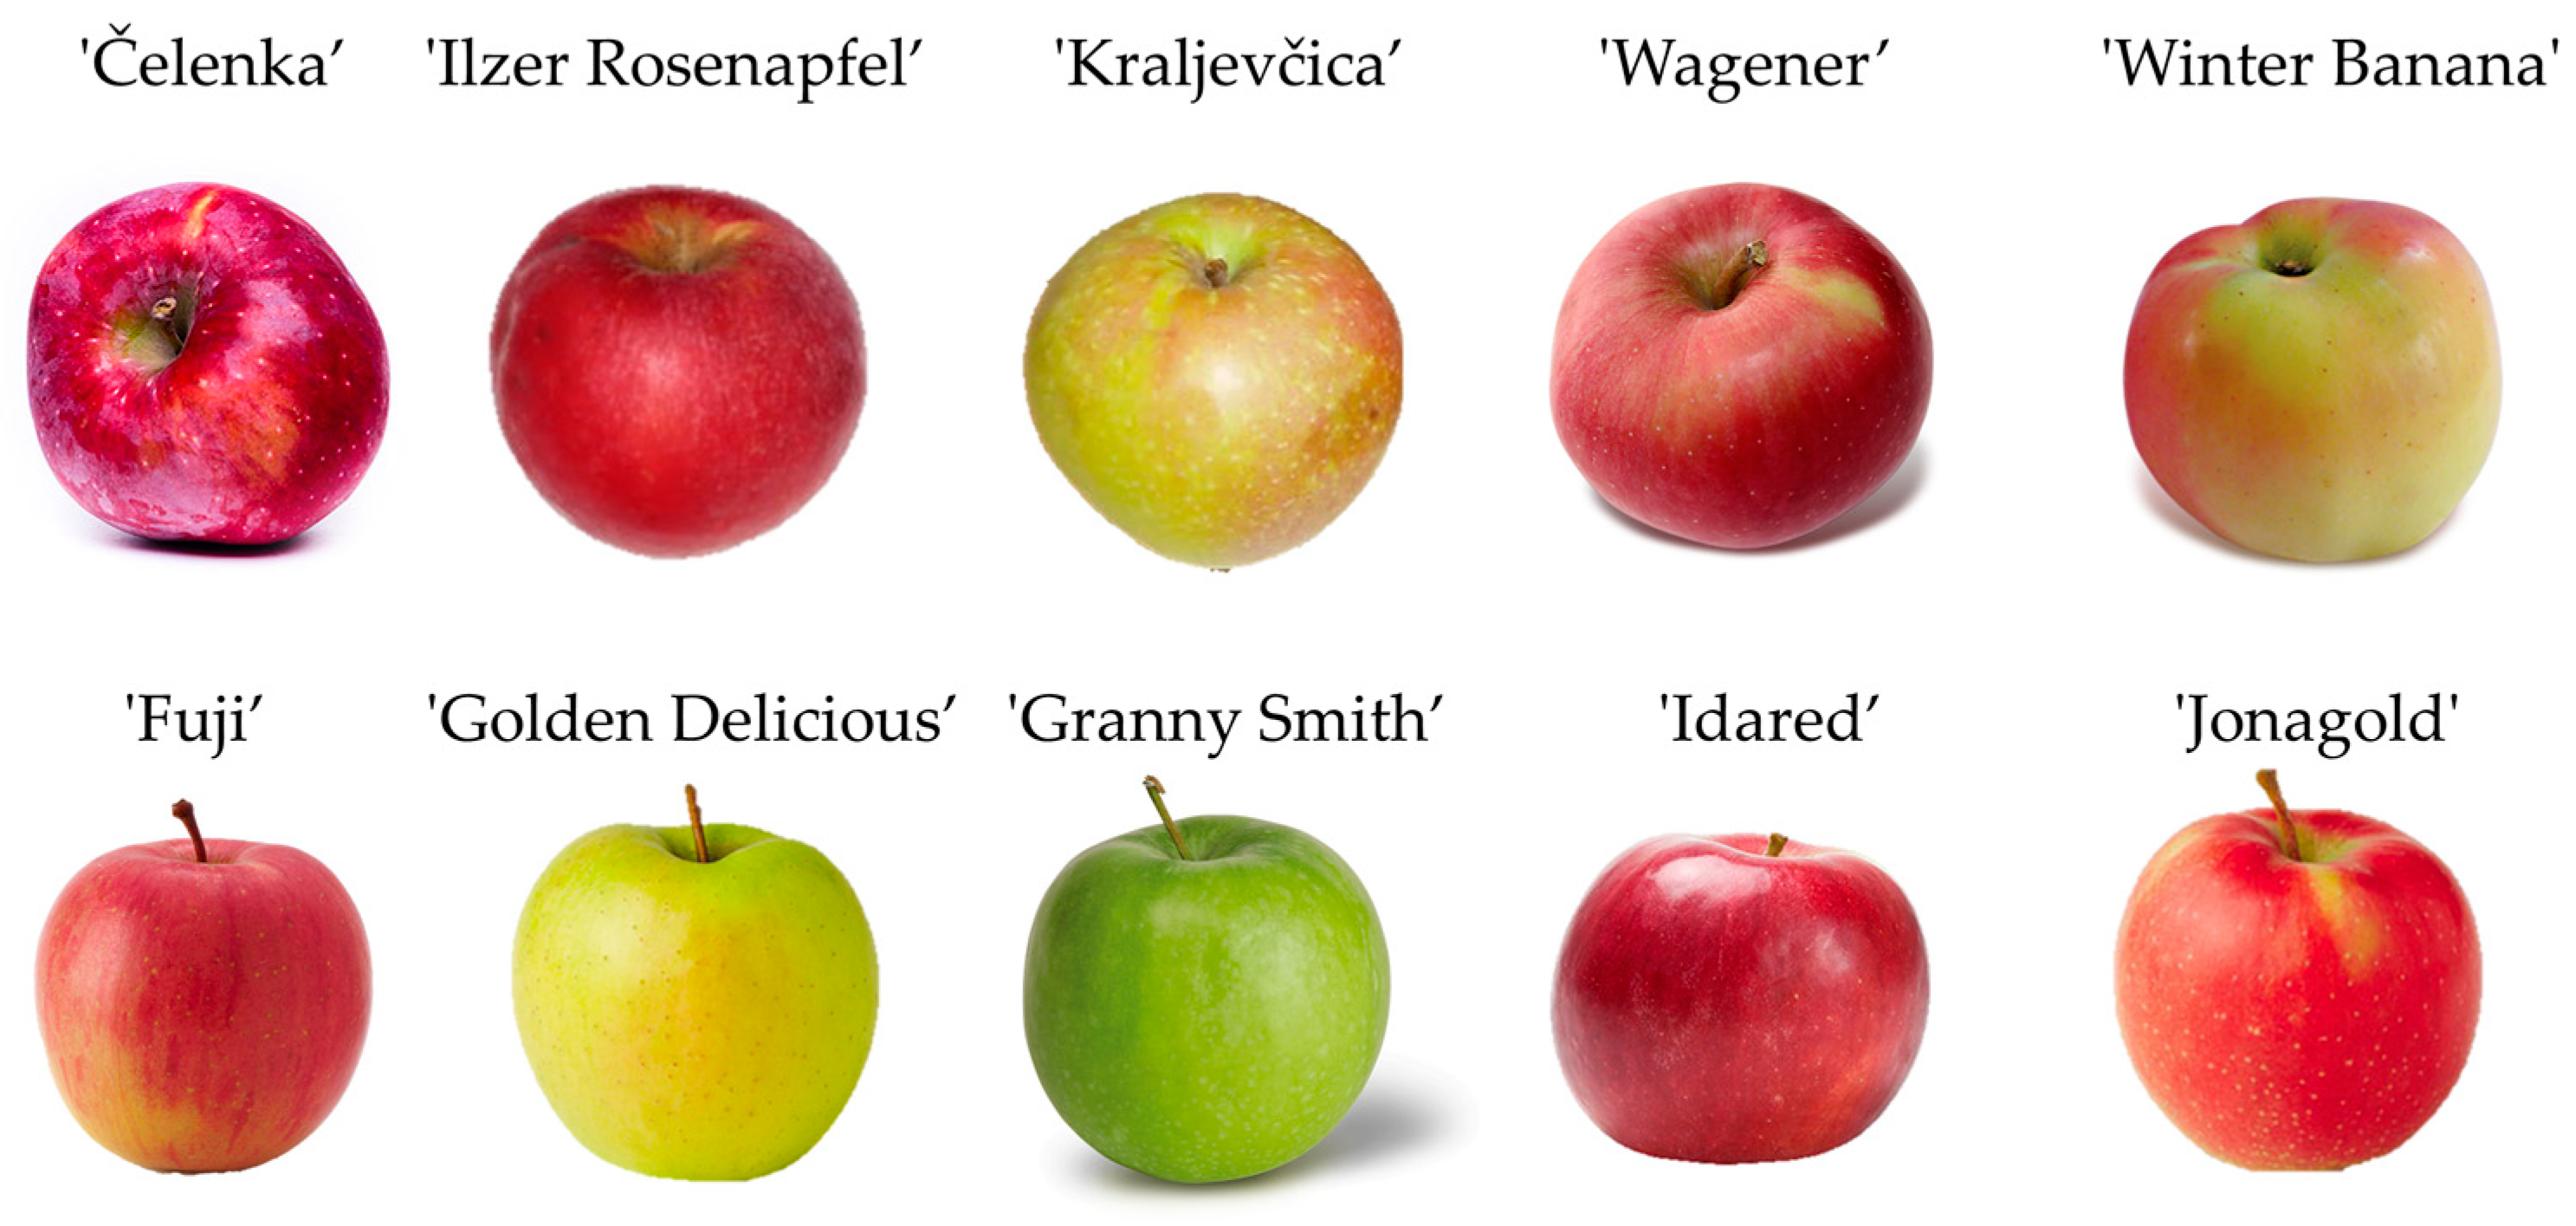 Apple - Granny Smith - tasting notes, identification, reviews